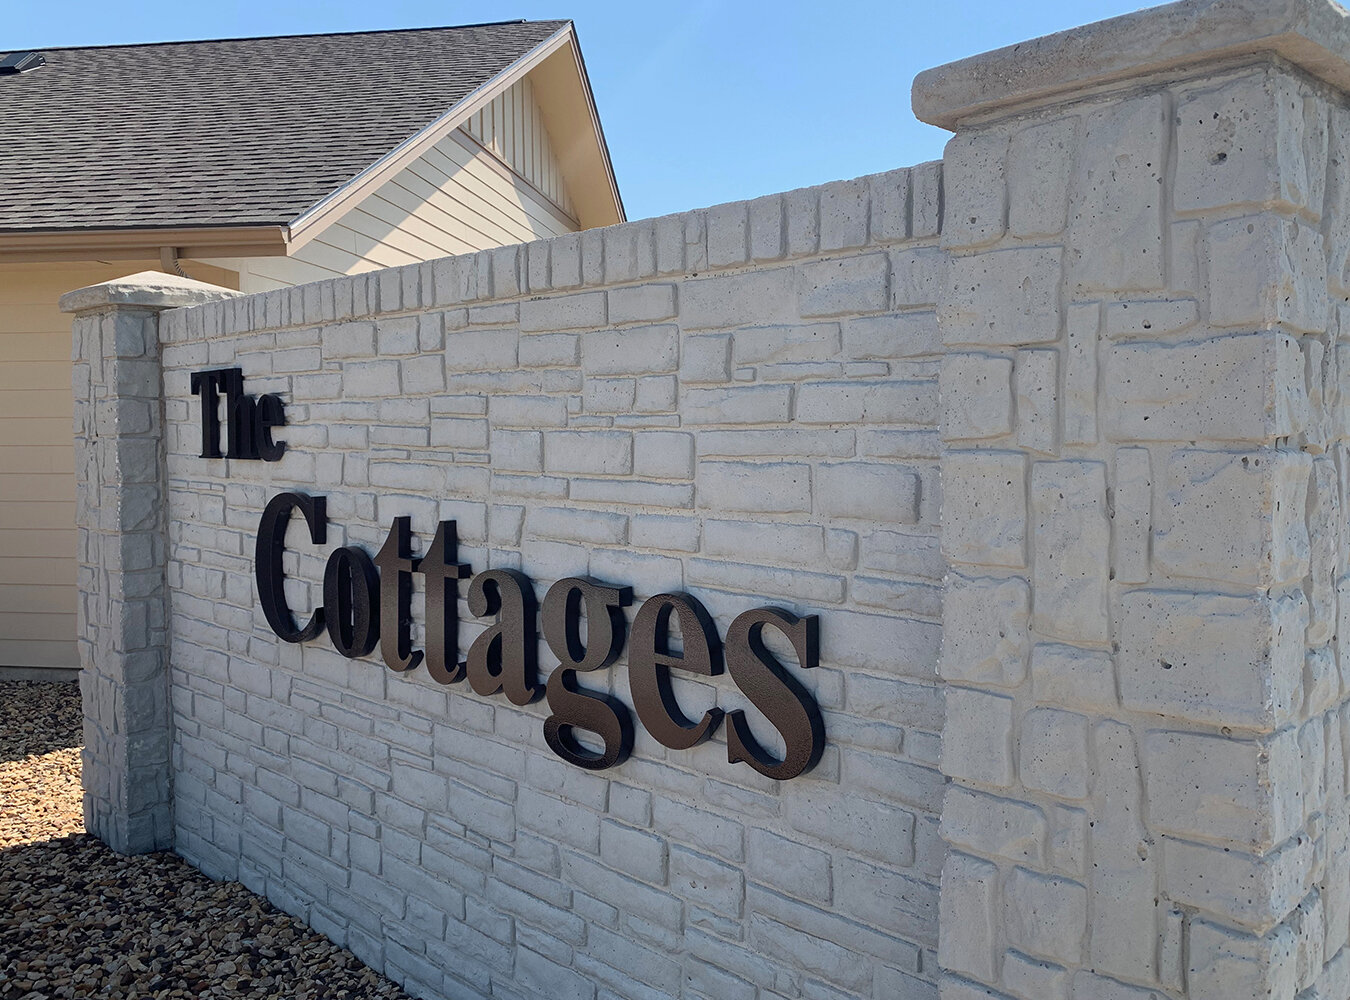 TheCottages_sign.jpg